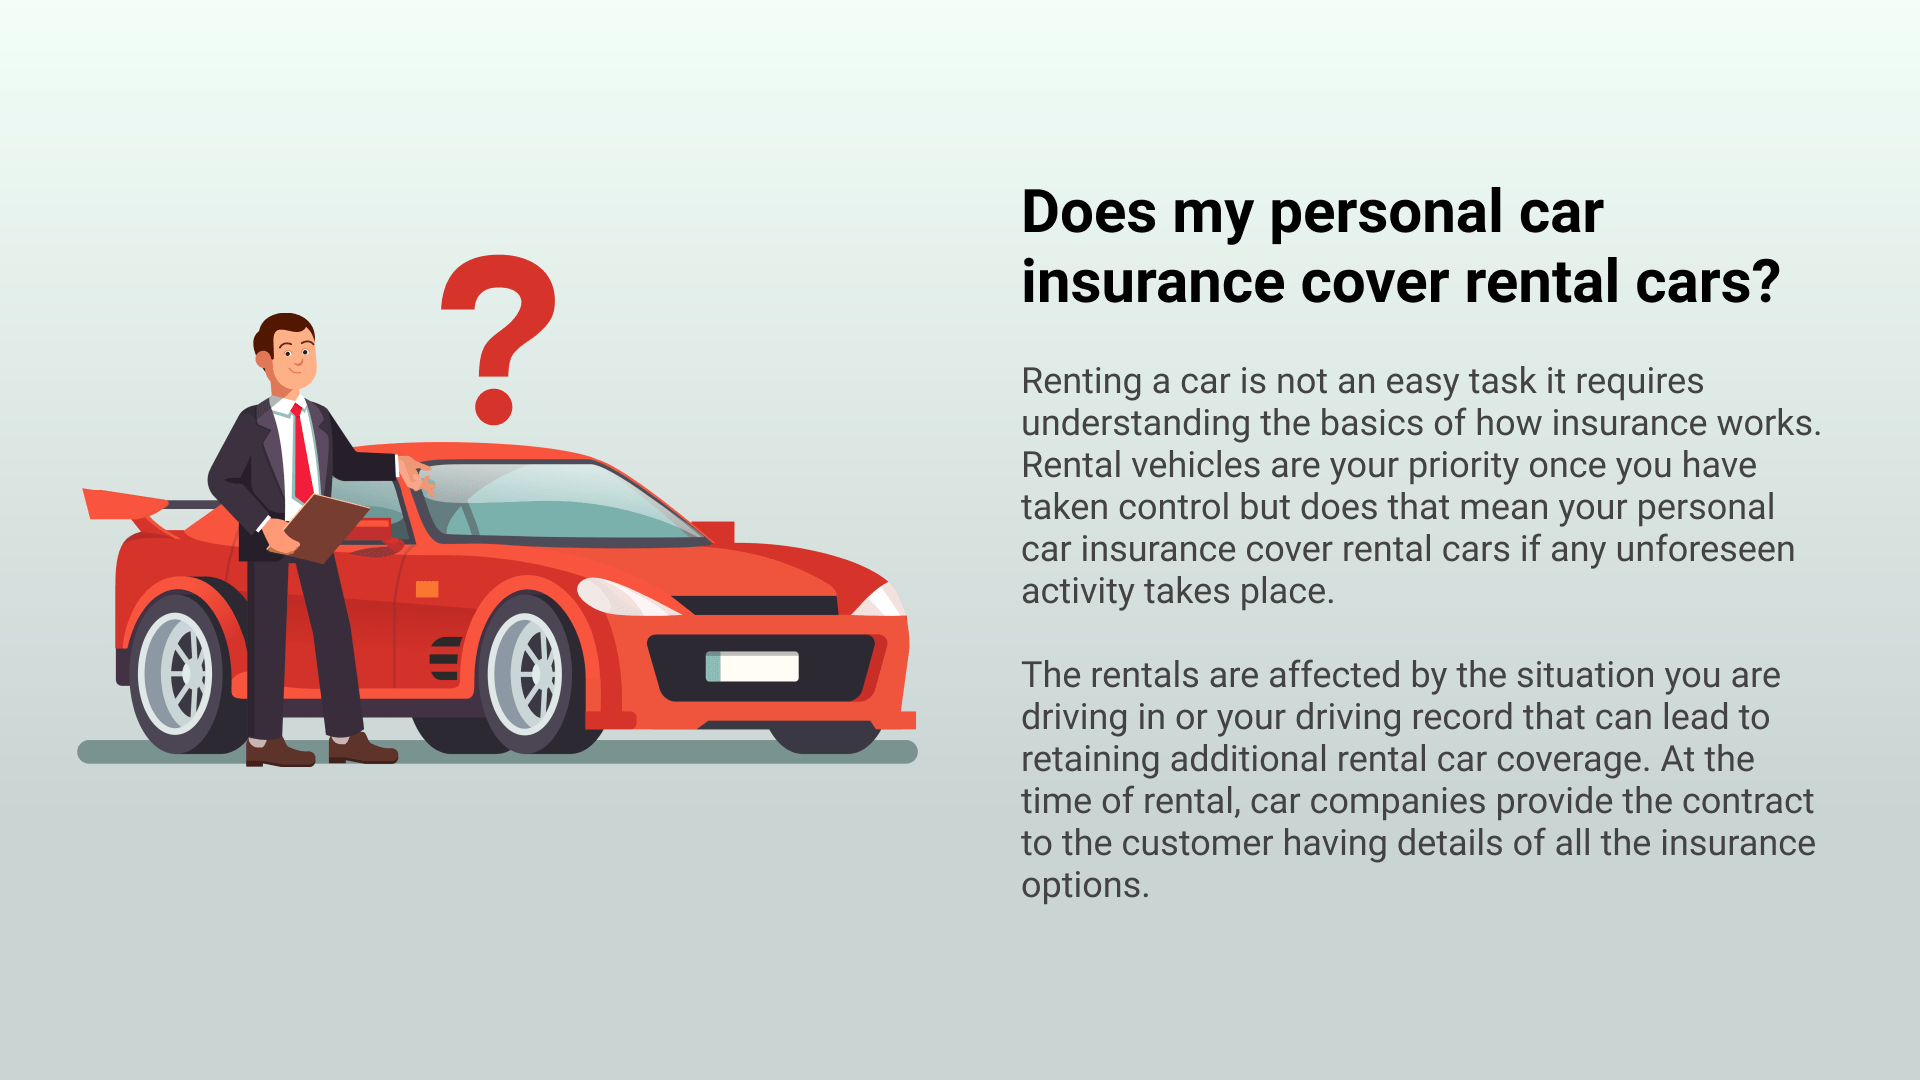 Do rental cars get coverage under personal car insurance?